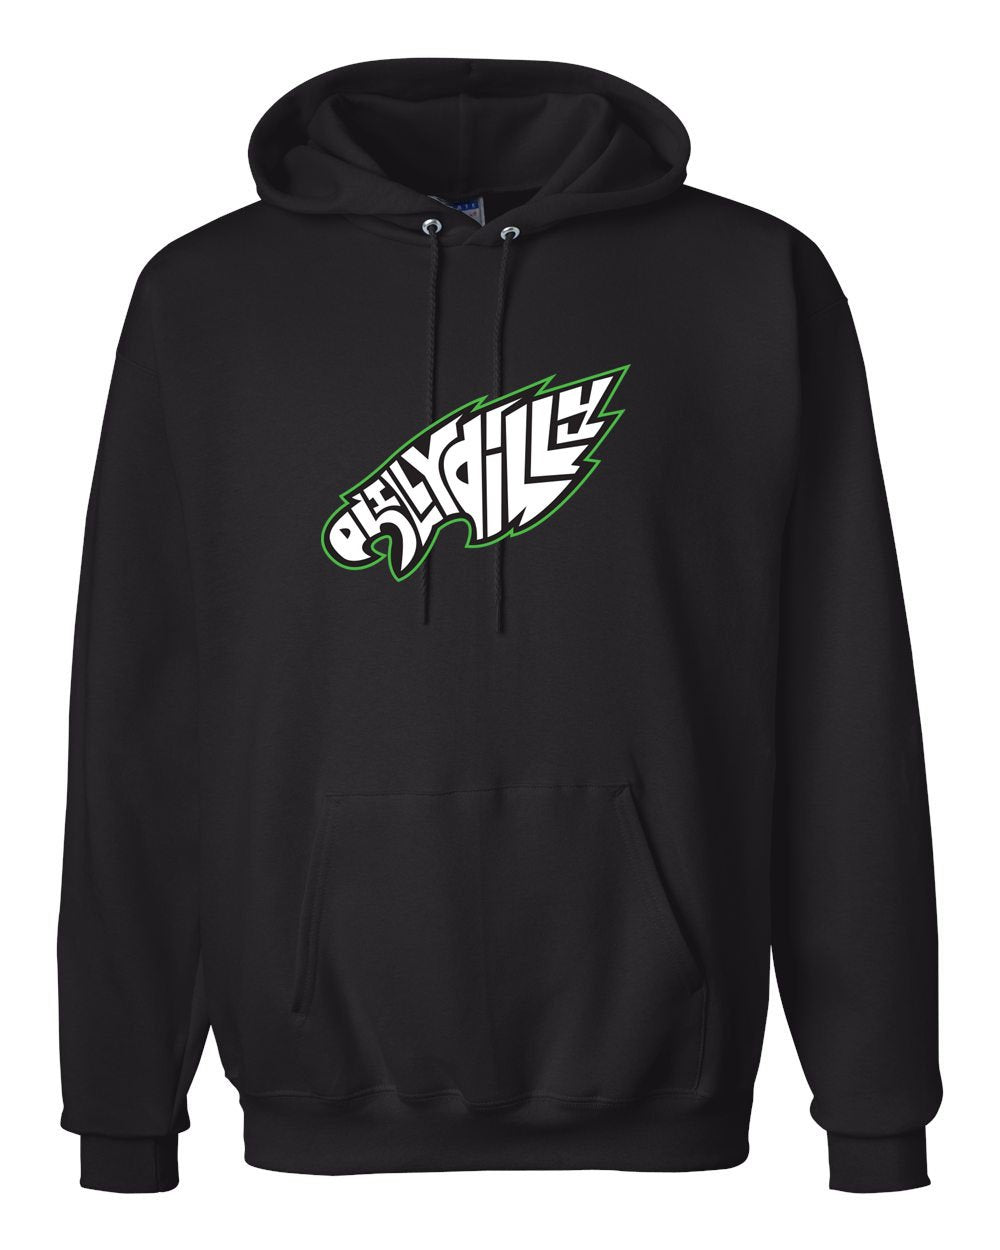 Philly Dilly Hoodie